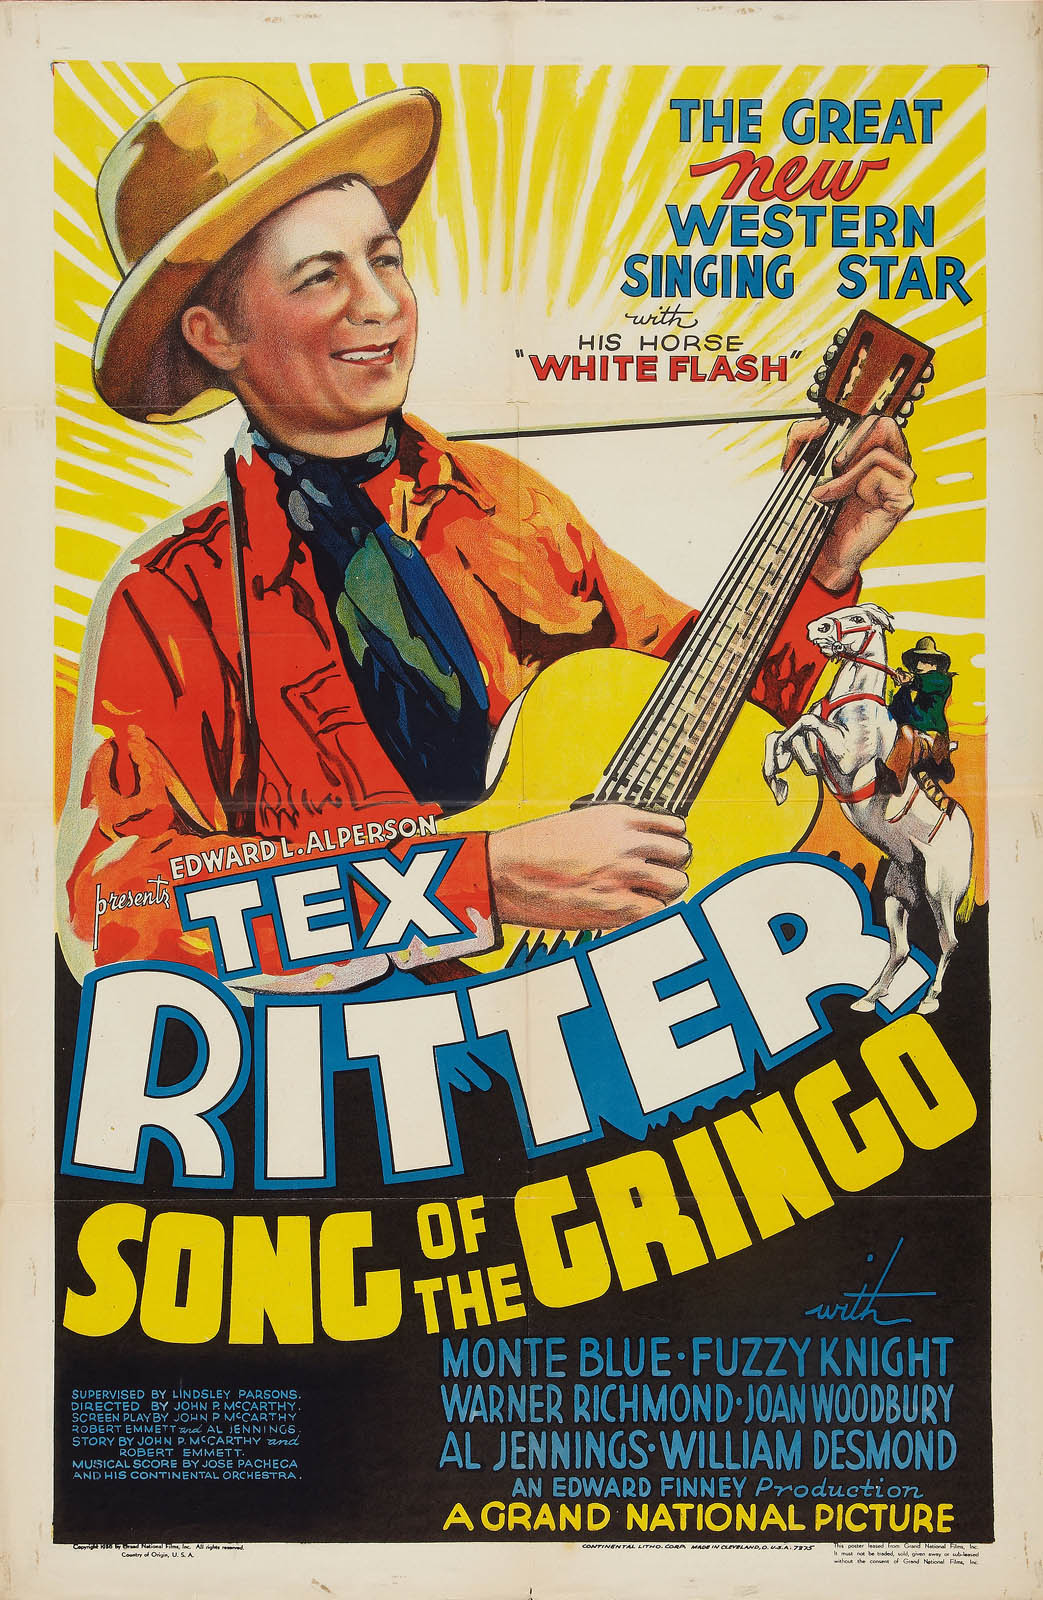 SONG OF THE GRINGO